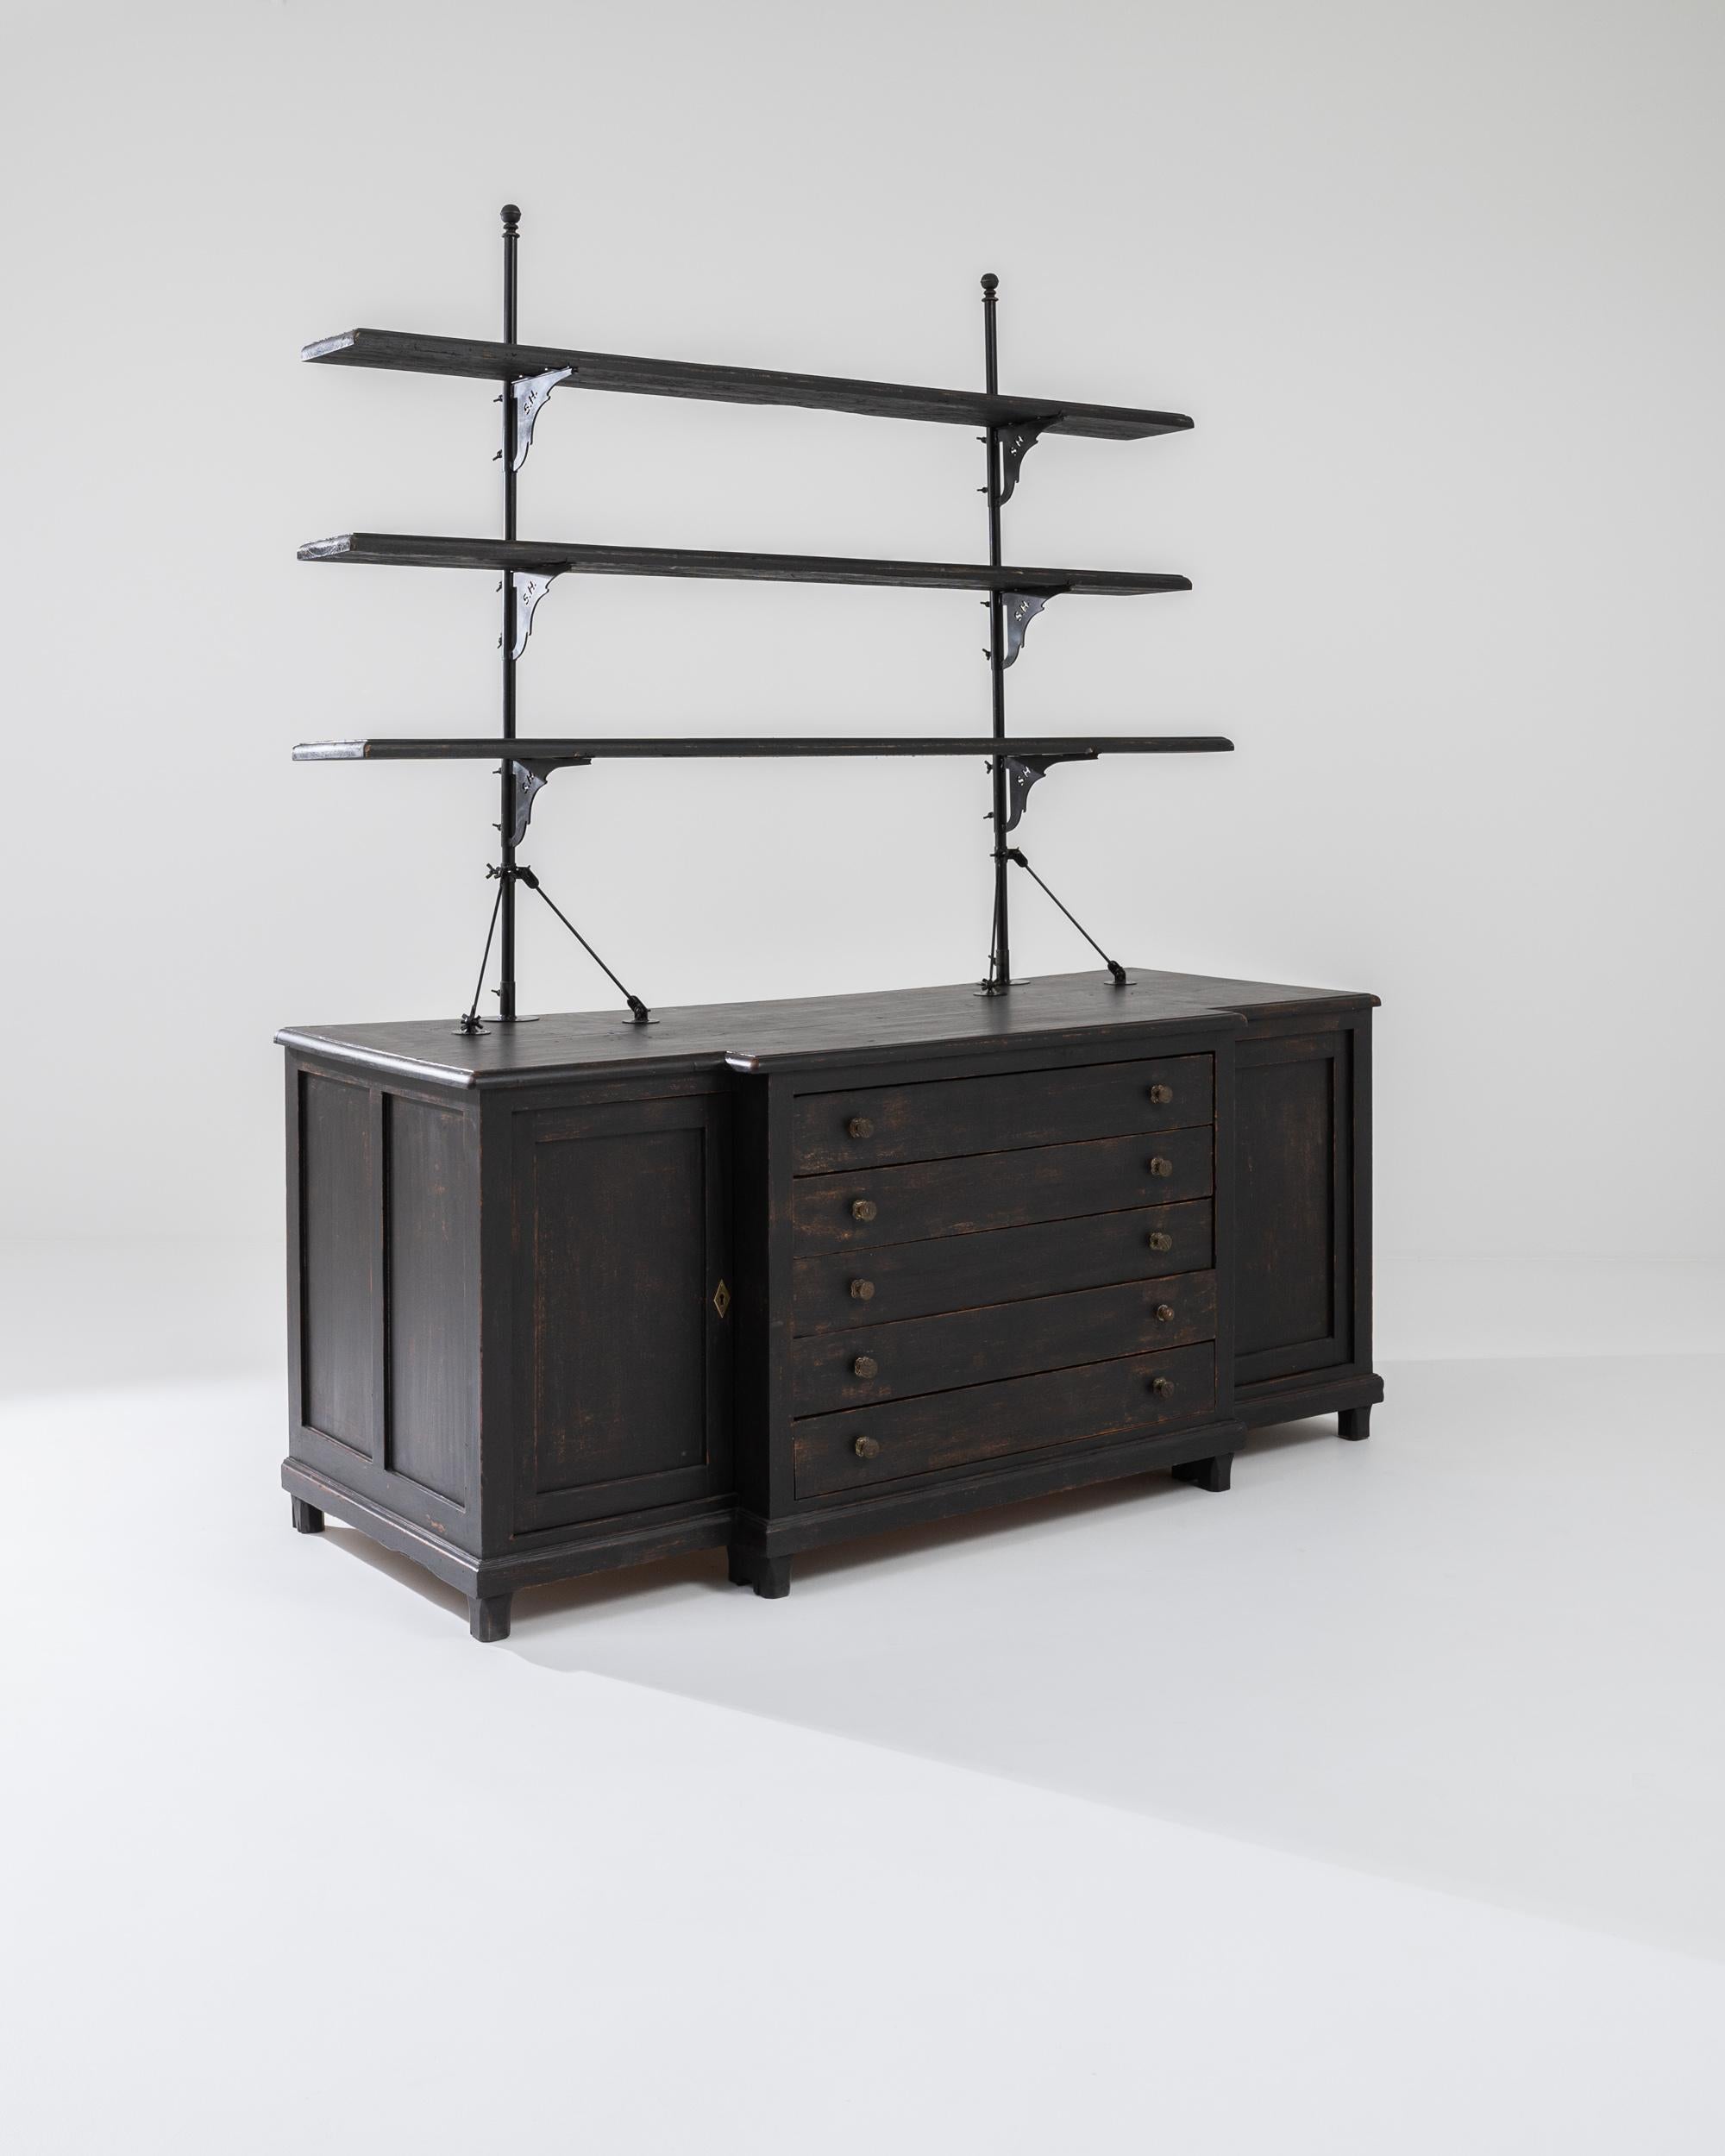 Rational and distinguished, this antique wooden display cabinet is a covetable find. Built in France in the 1800s, the airy, stripped-back composition of the upper shelves evokes the furled masts of ships, while the central drawers of the lower